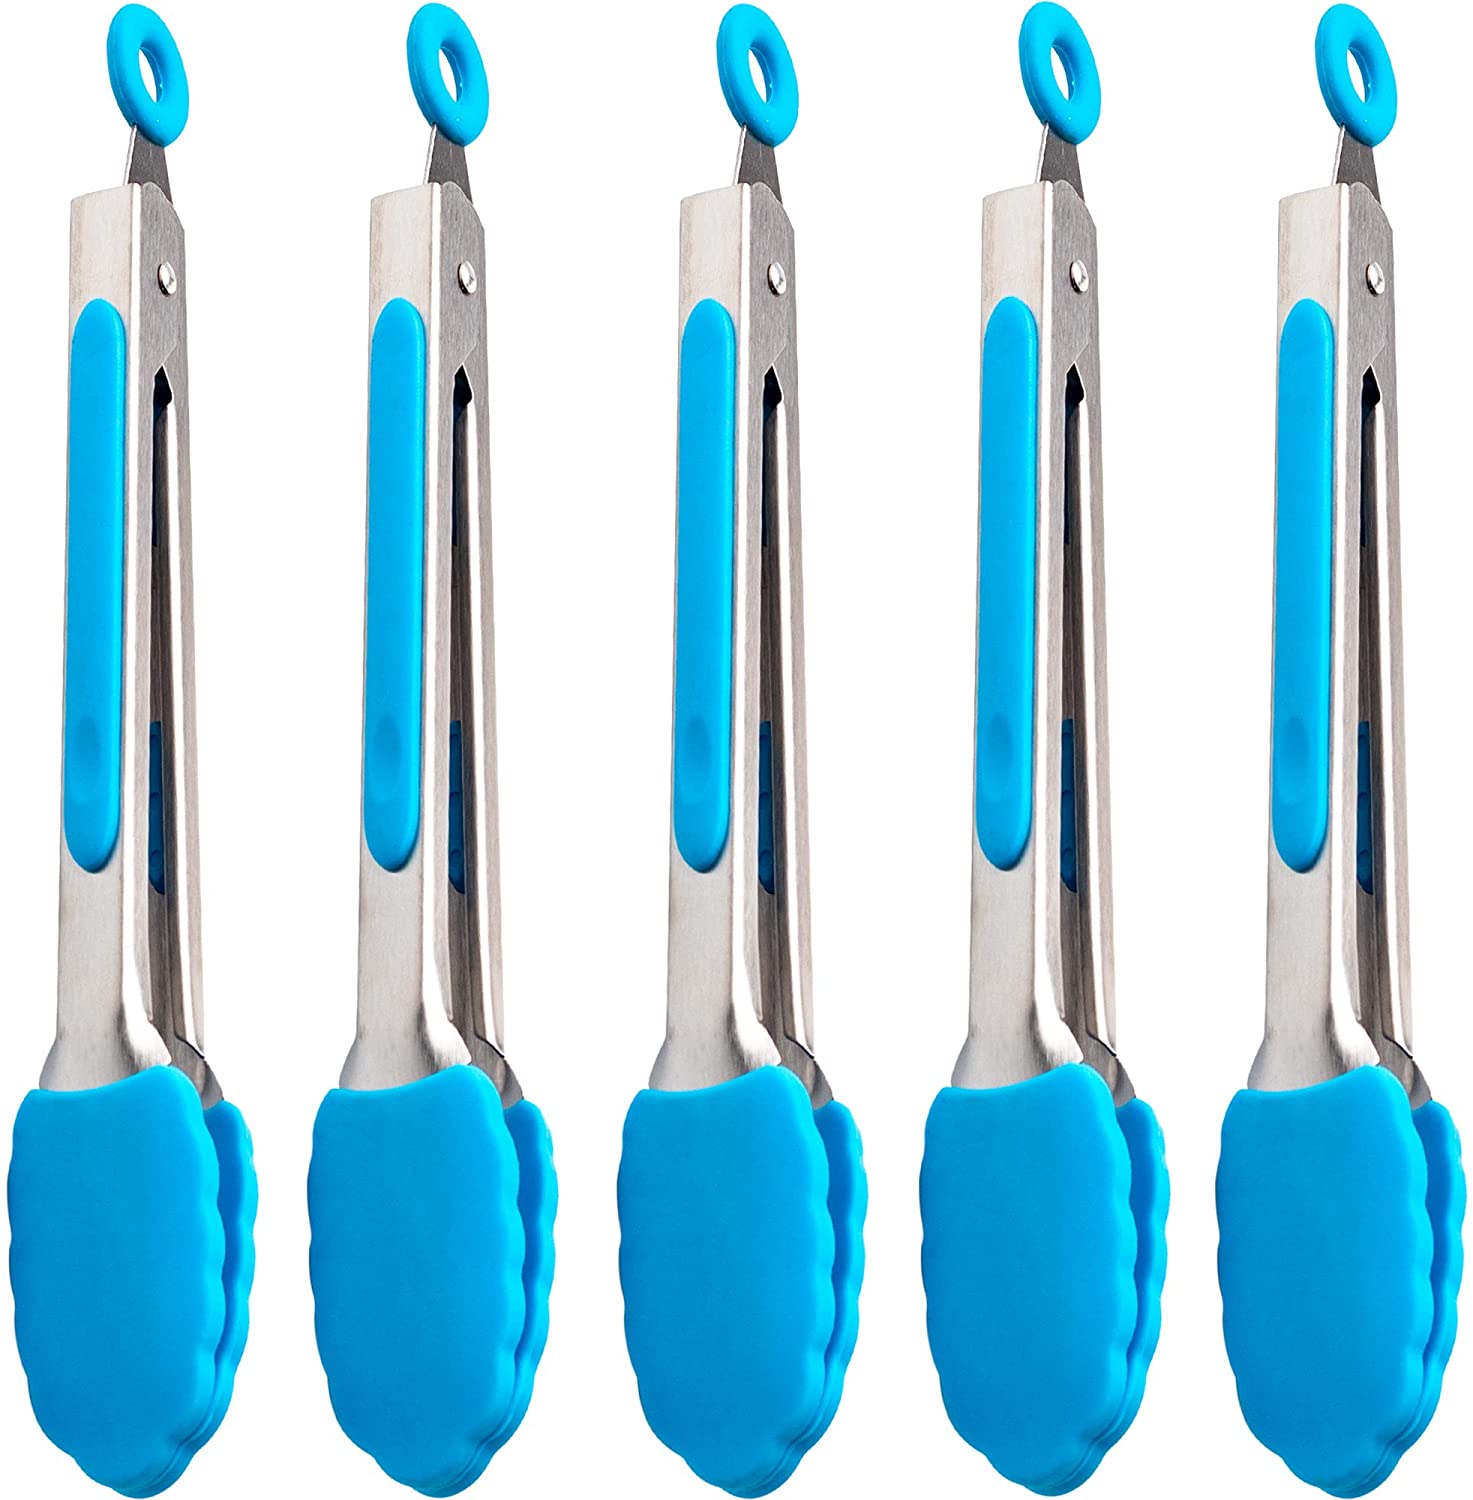 5 Pack Silicone Kitchen Cooking Tongs Set 7-Inch Mini Heavy Duty Stainless  Steel Small with Non-Stick Tips for Food,Serving,BBQ,Salad,Grilling and